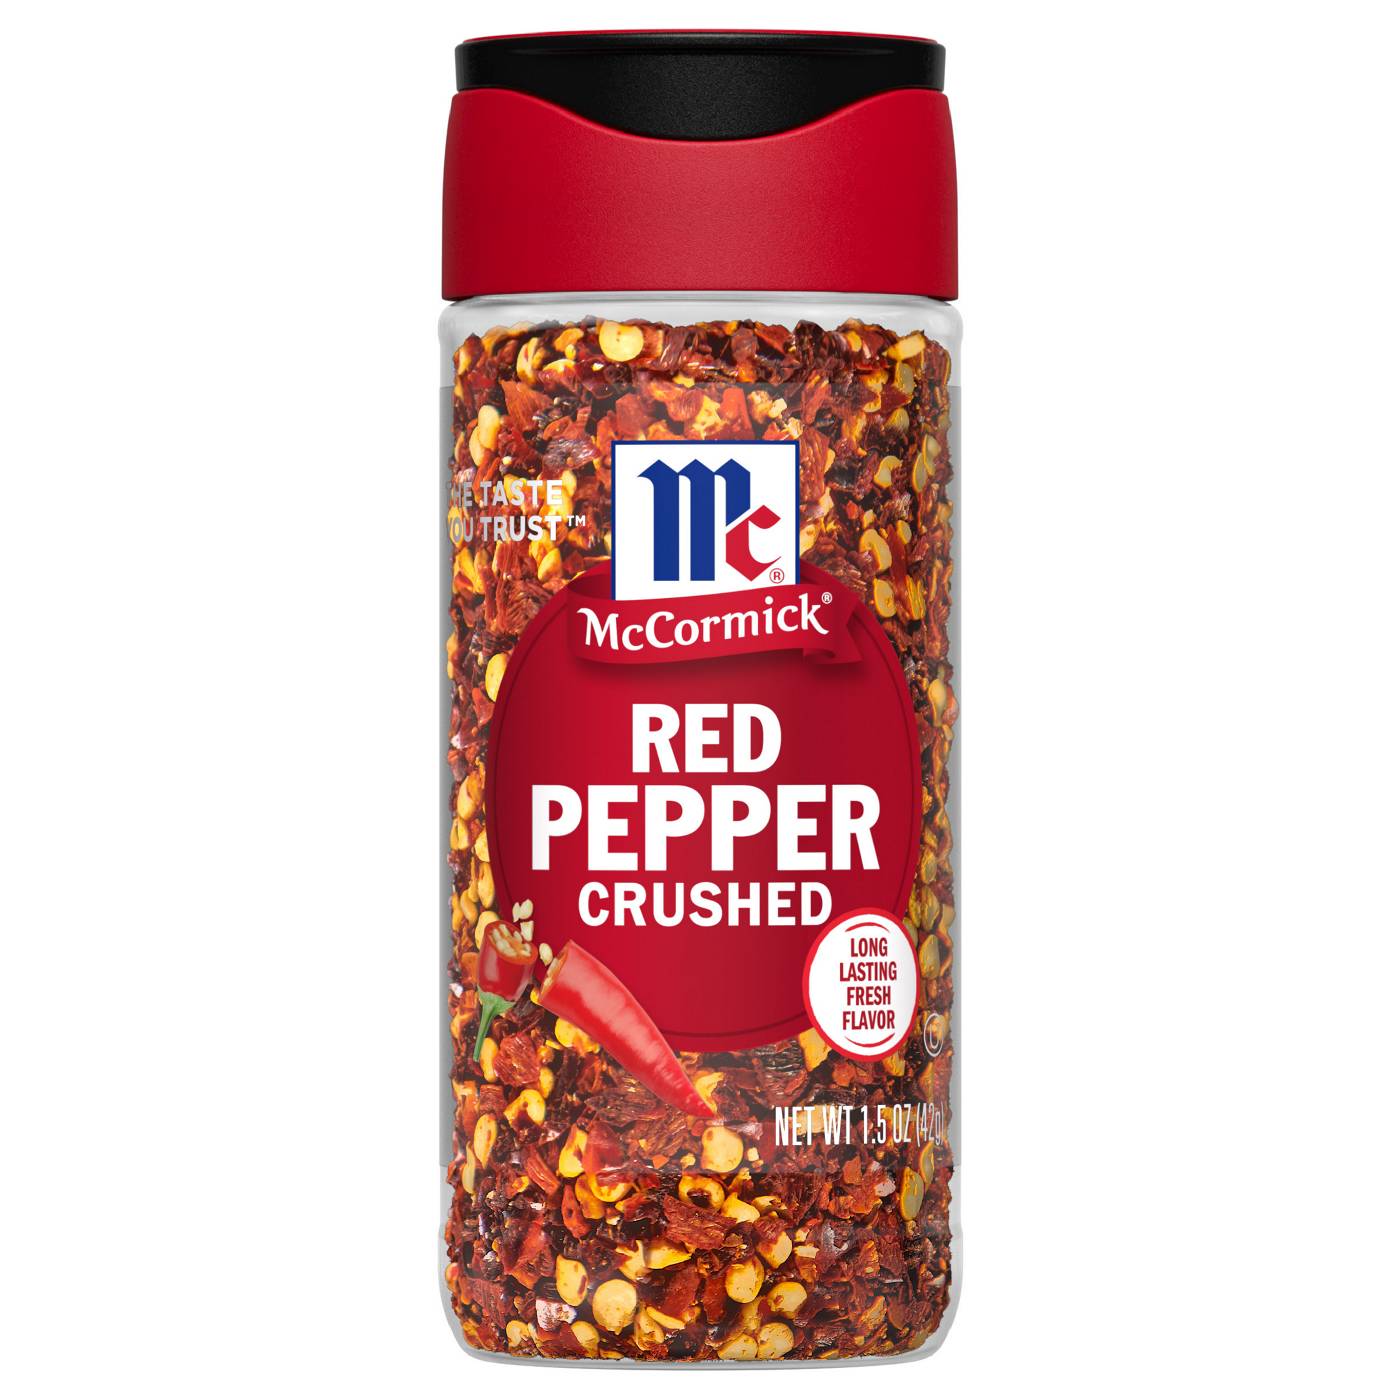 McCormick Crushed Red Pepper; image 1 of 8